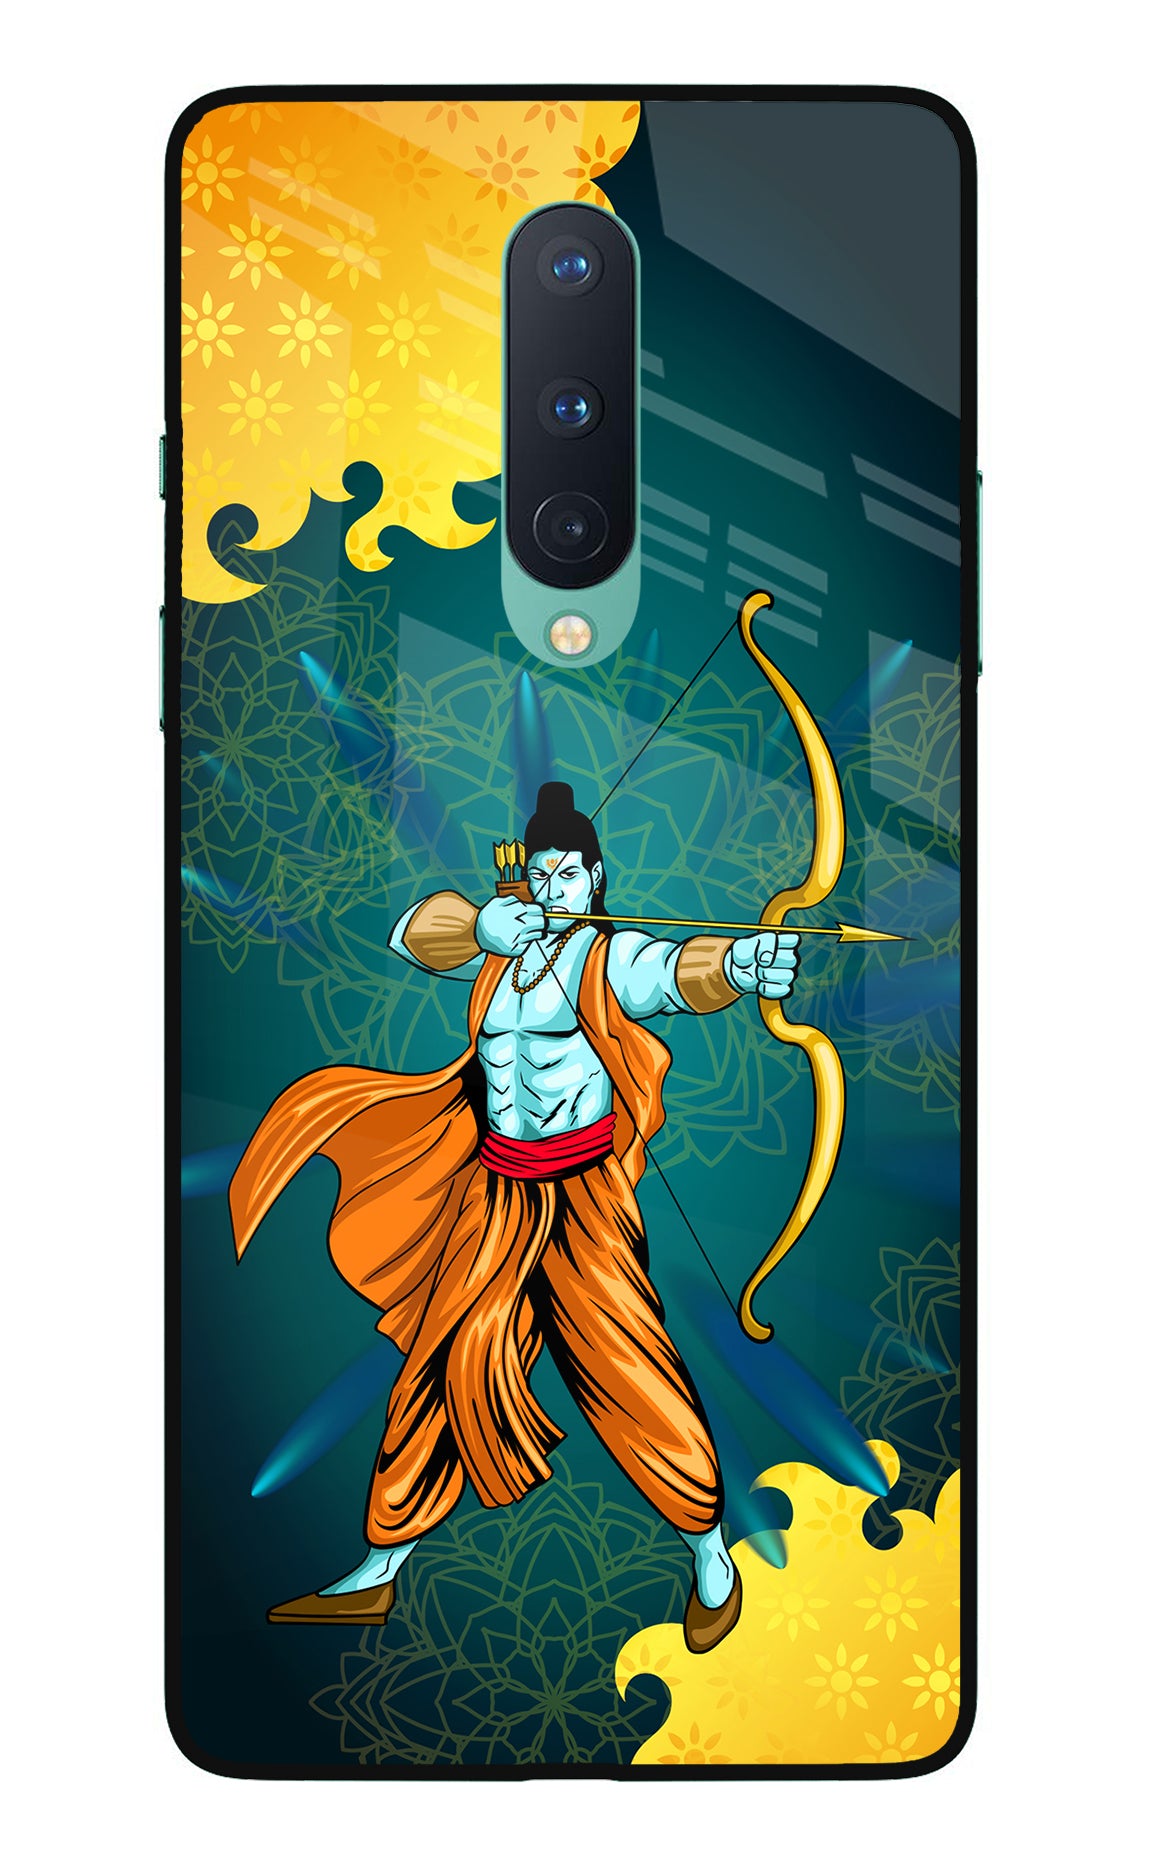 Lord Ram - 6 Oneplus 8 Back Cover